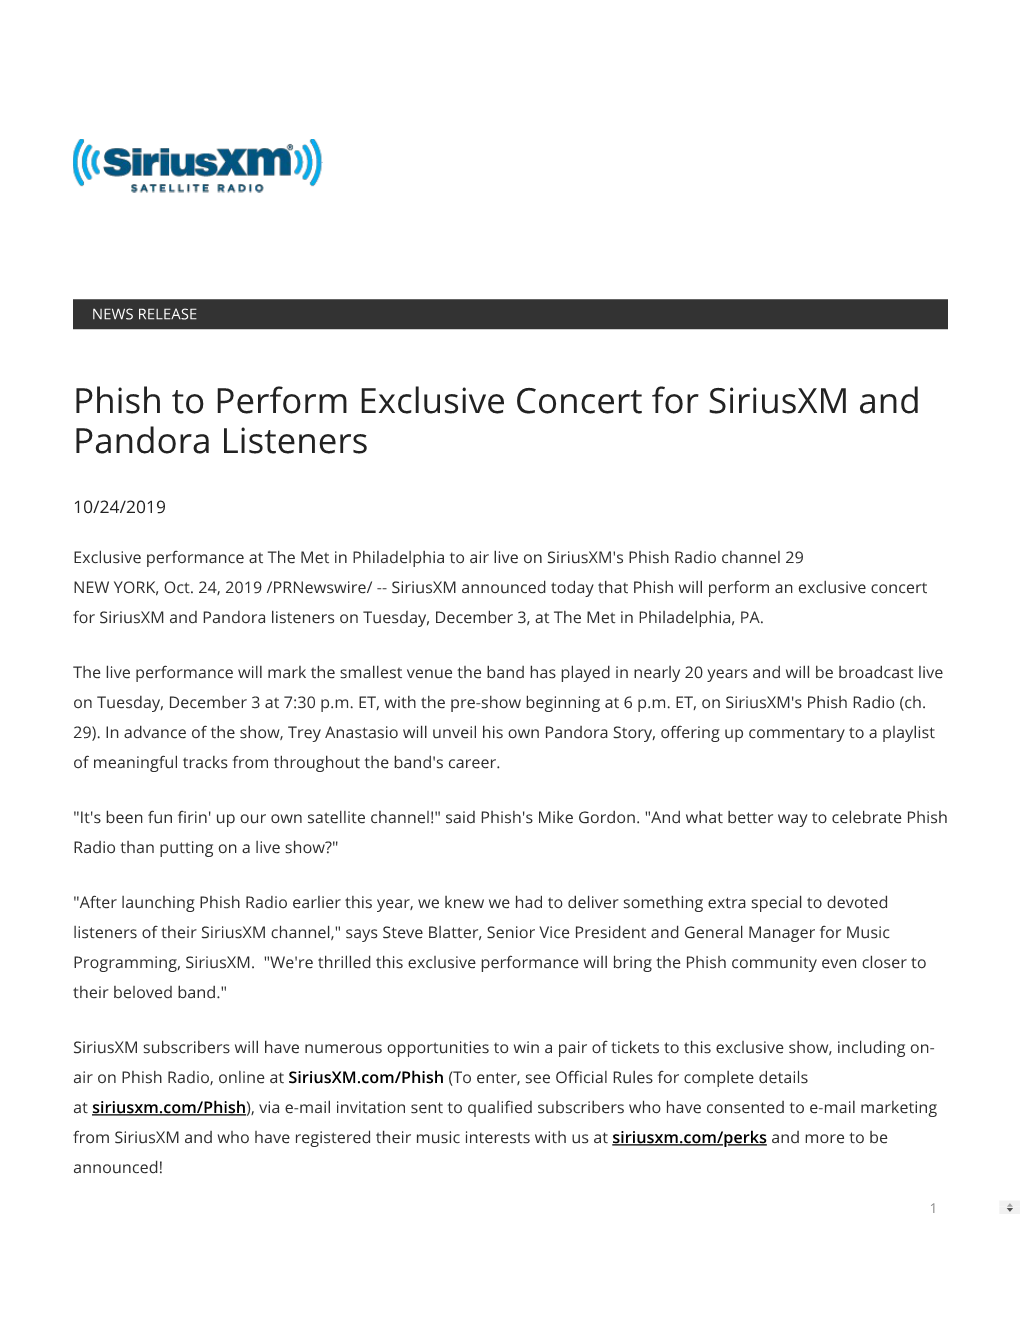 Phish to Perform Exclusive Concert for Siriusxm and Pandora Listeners